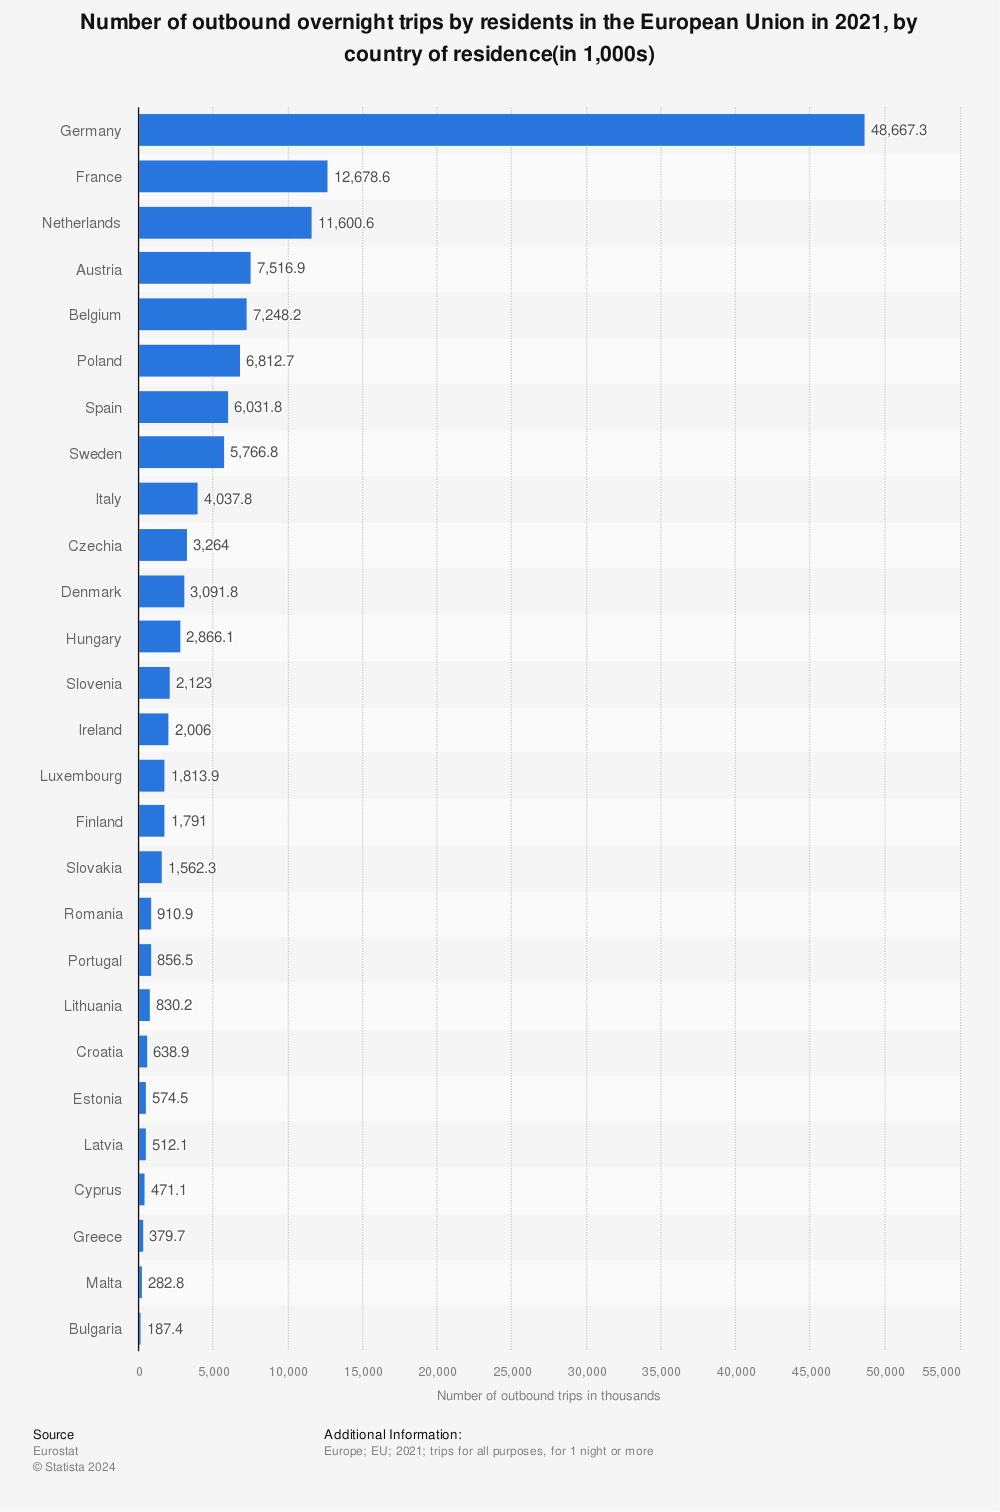 Statistic: Number of outbound overnight trips in the European Union (27 countries) in 2019, by country (in 1,000s) | Statista